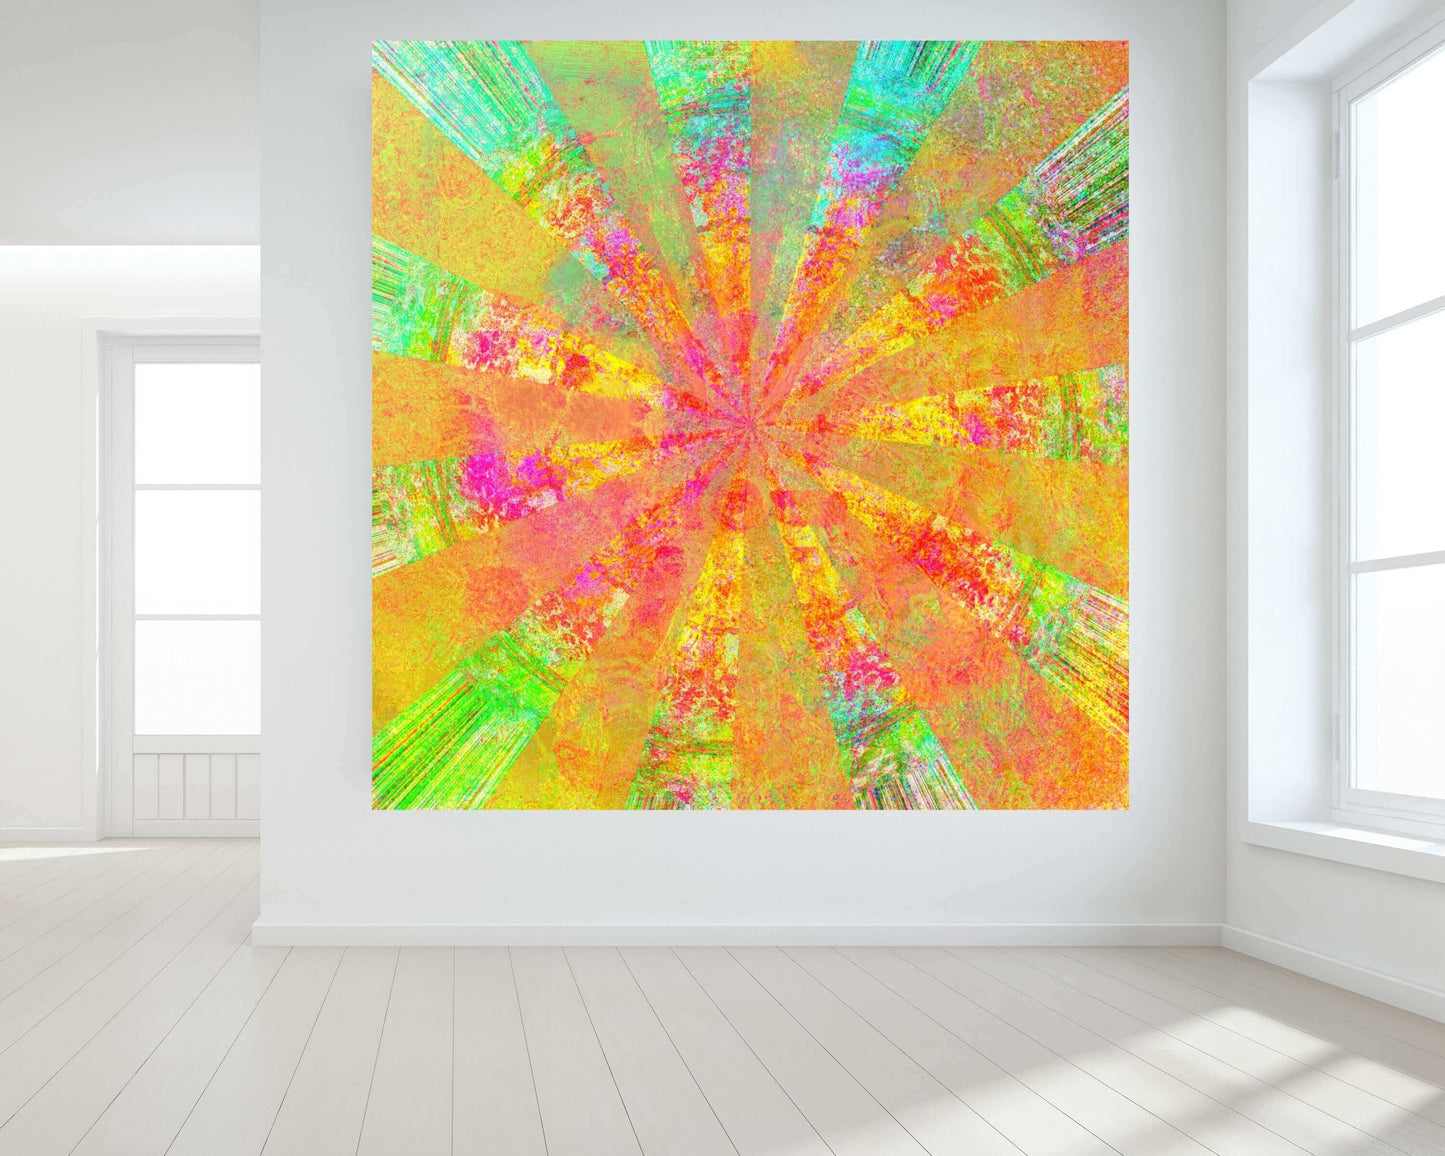 Fractal Orange and Green Kaleidoscope “Stingray” Abstract Art Canvas Print Wall Art Large Canvas on Wall